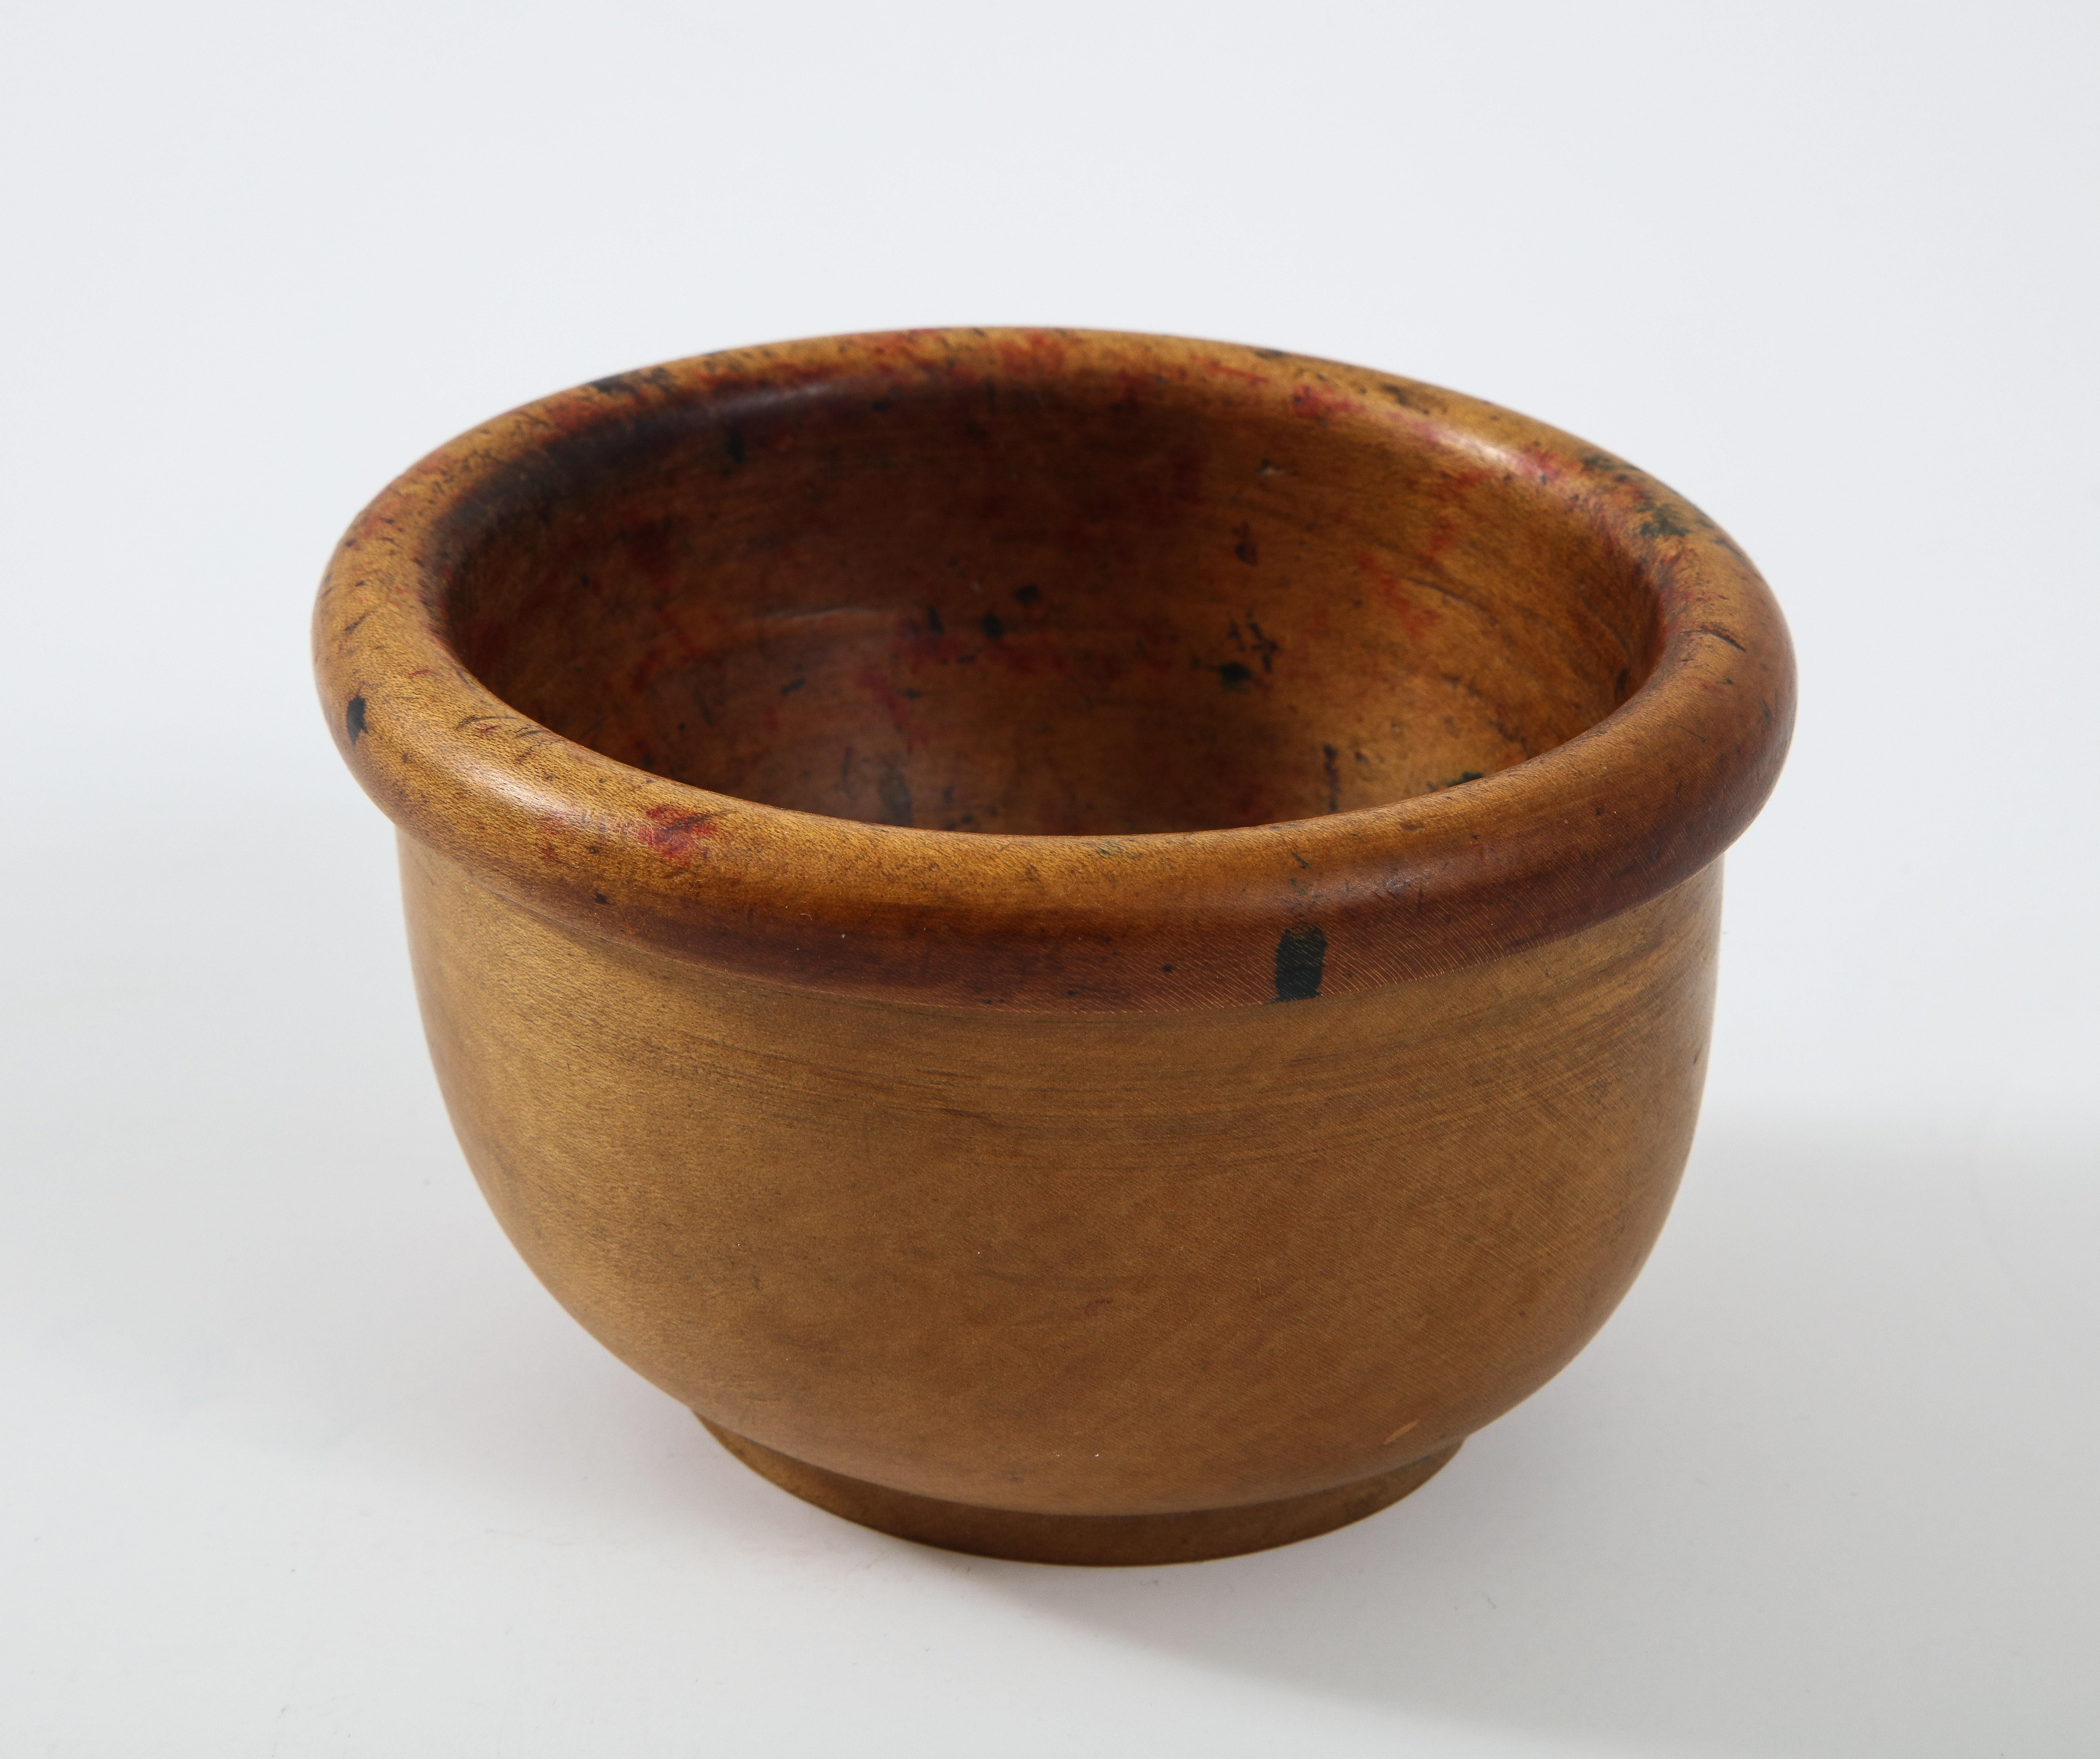 American Craftsman Hand-Turned American Wood Bowl with Thick Rim